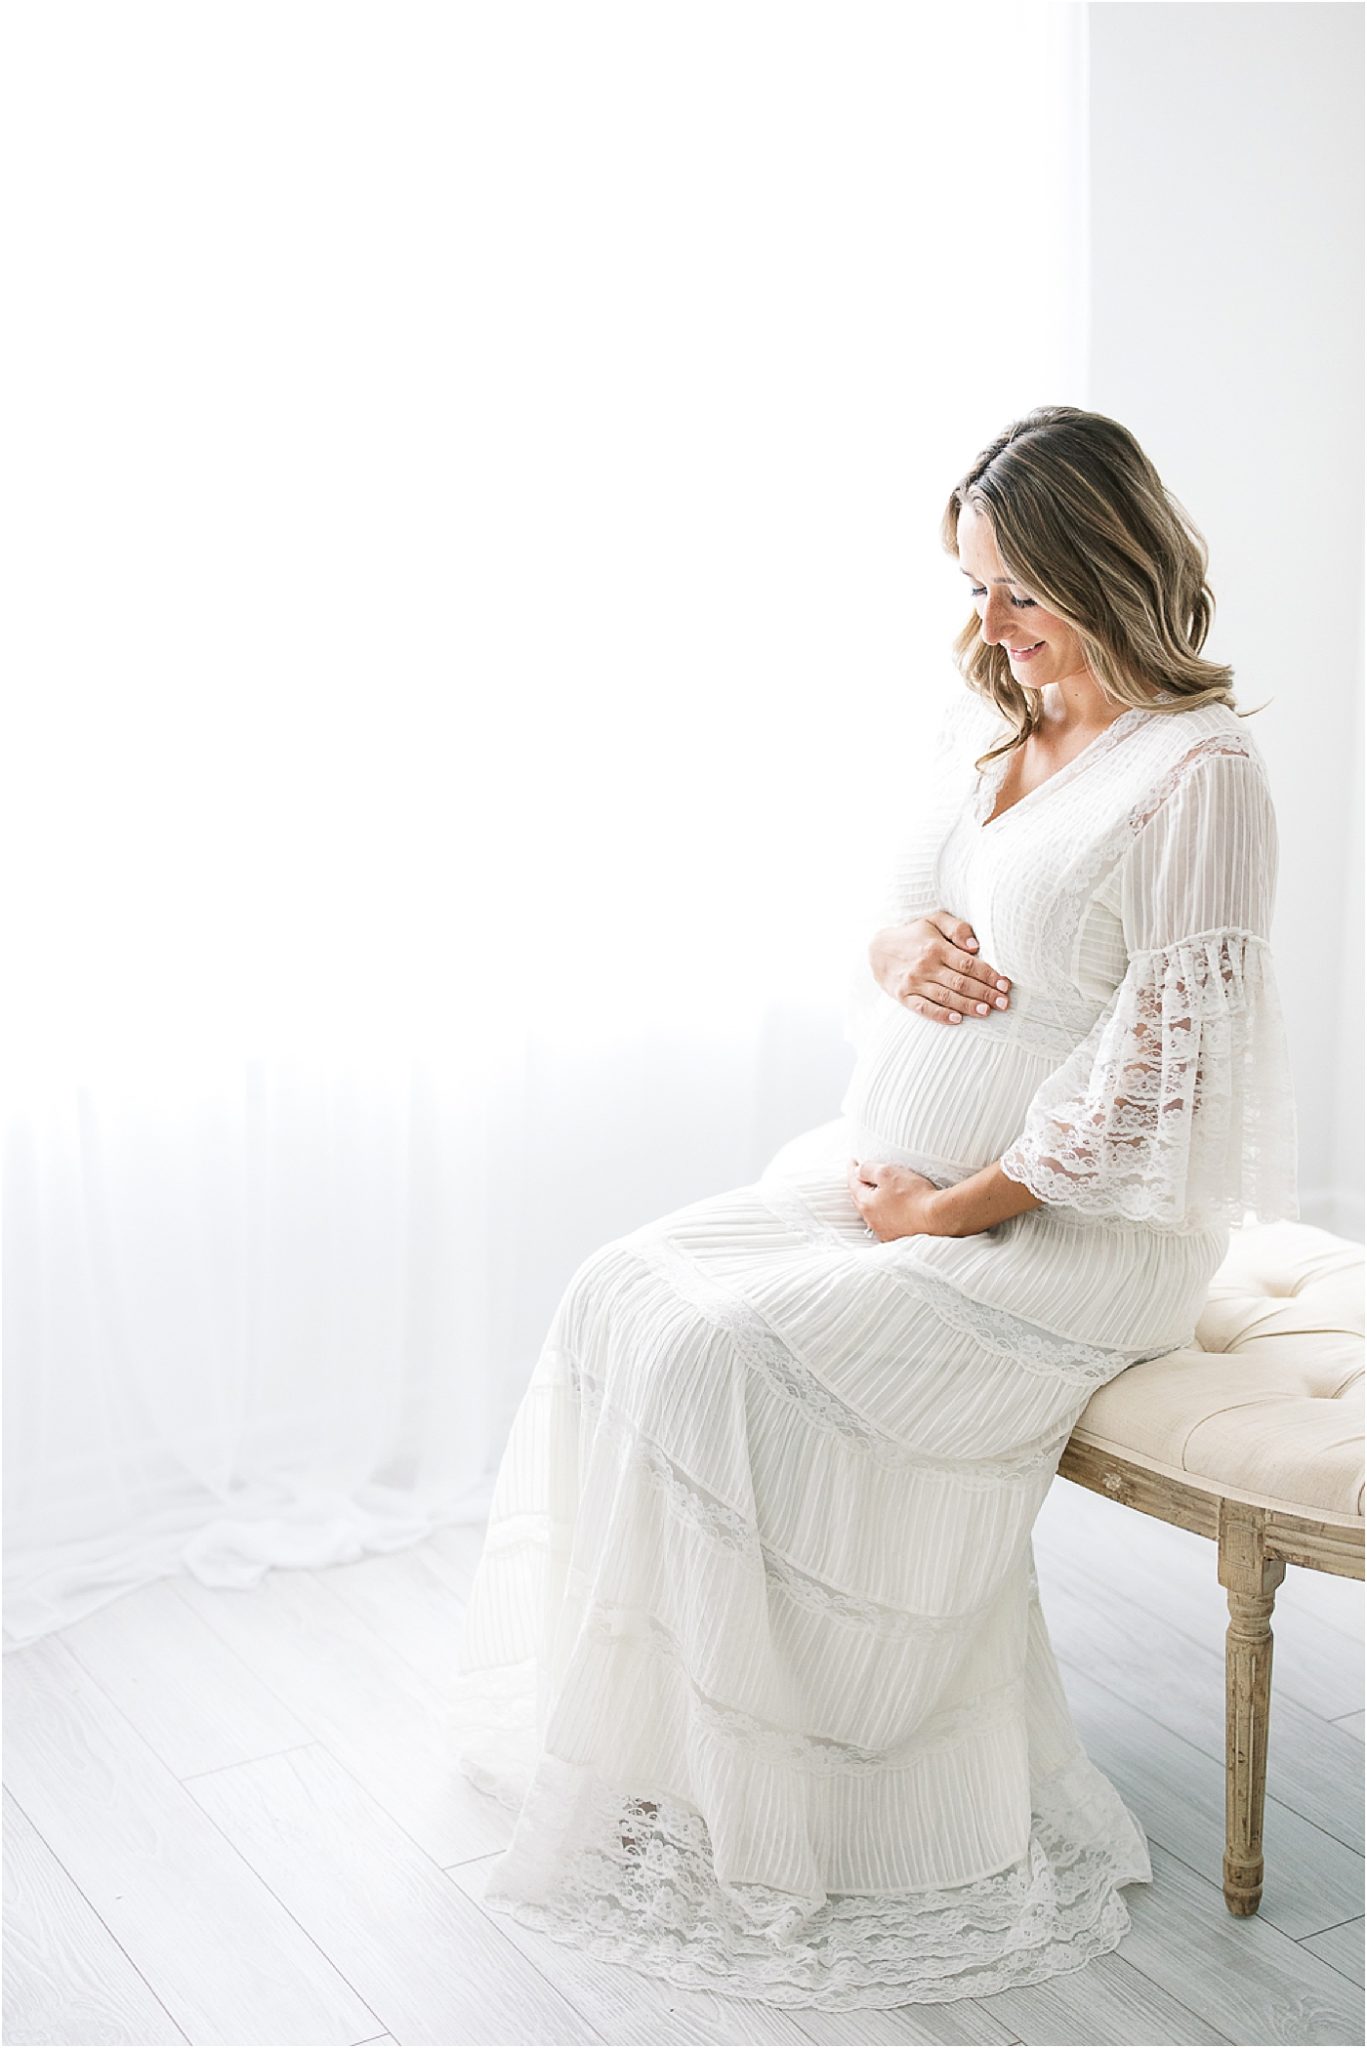 Studio maternity session in Fishers IN with Lindsay Konopa Photography